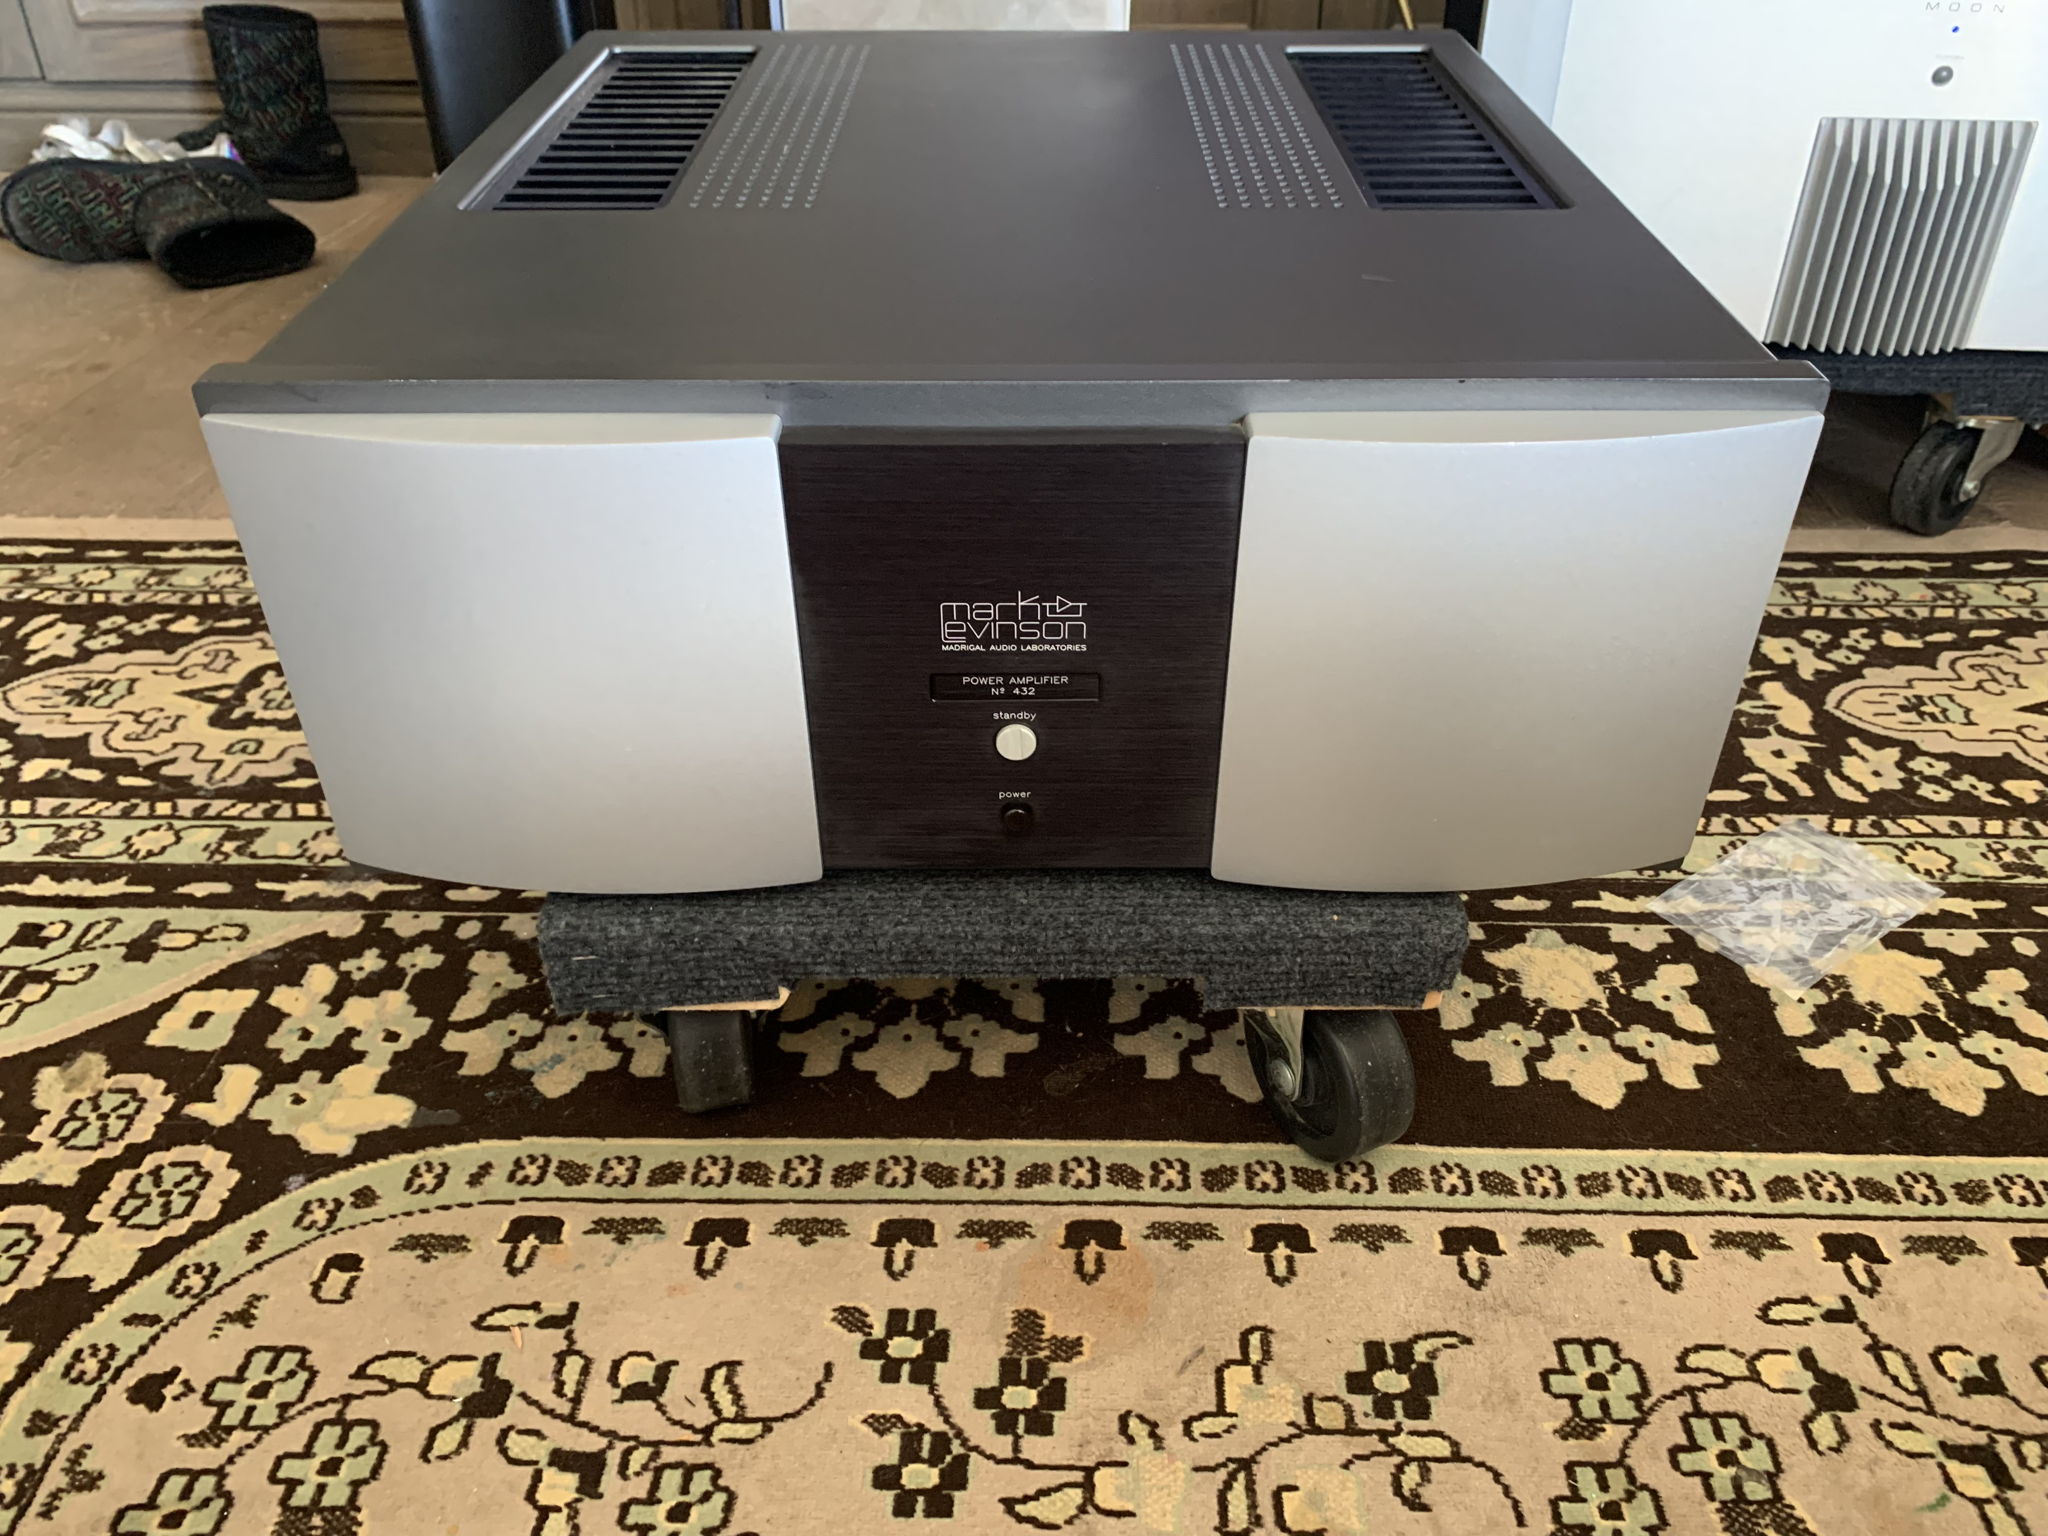 Mark Levinson No 432 Extremely Clean inside and out 3